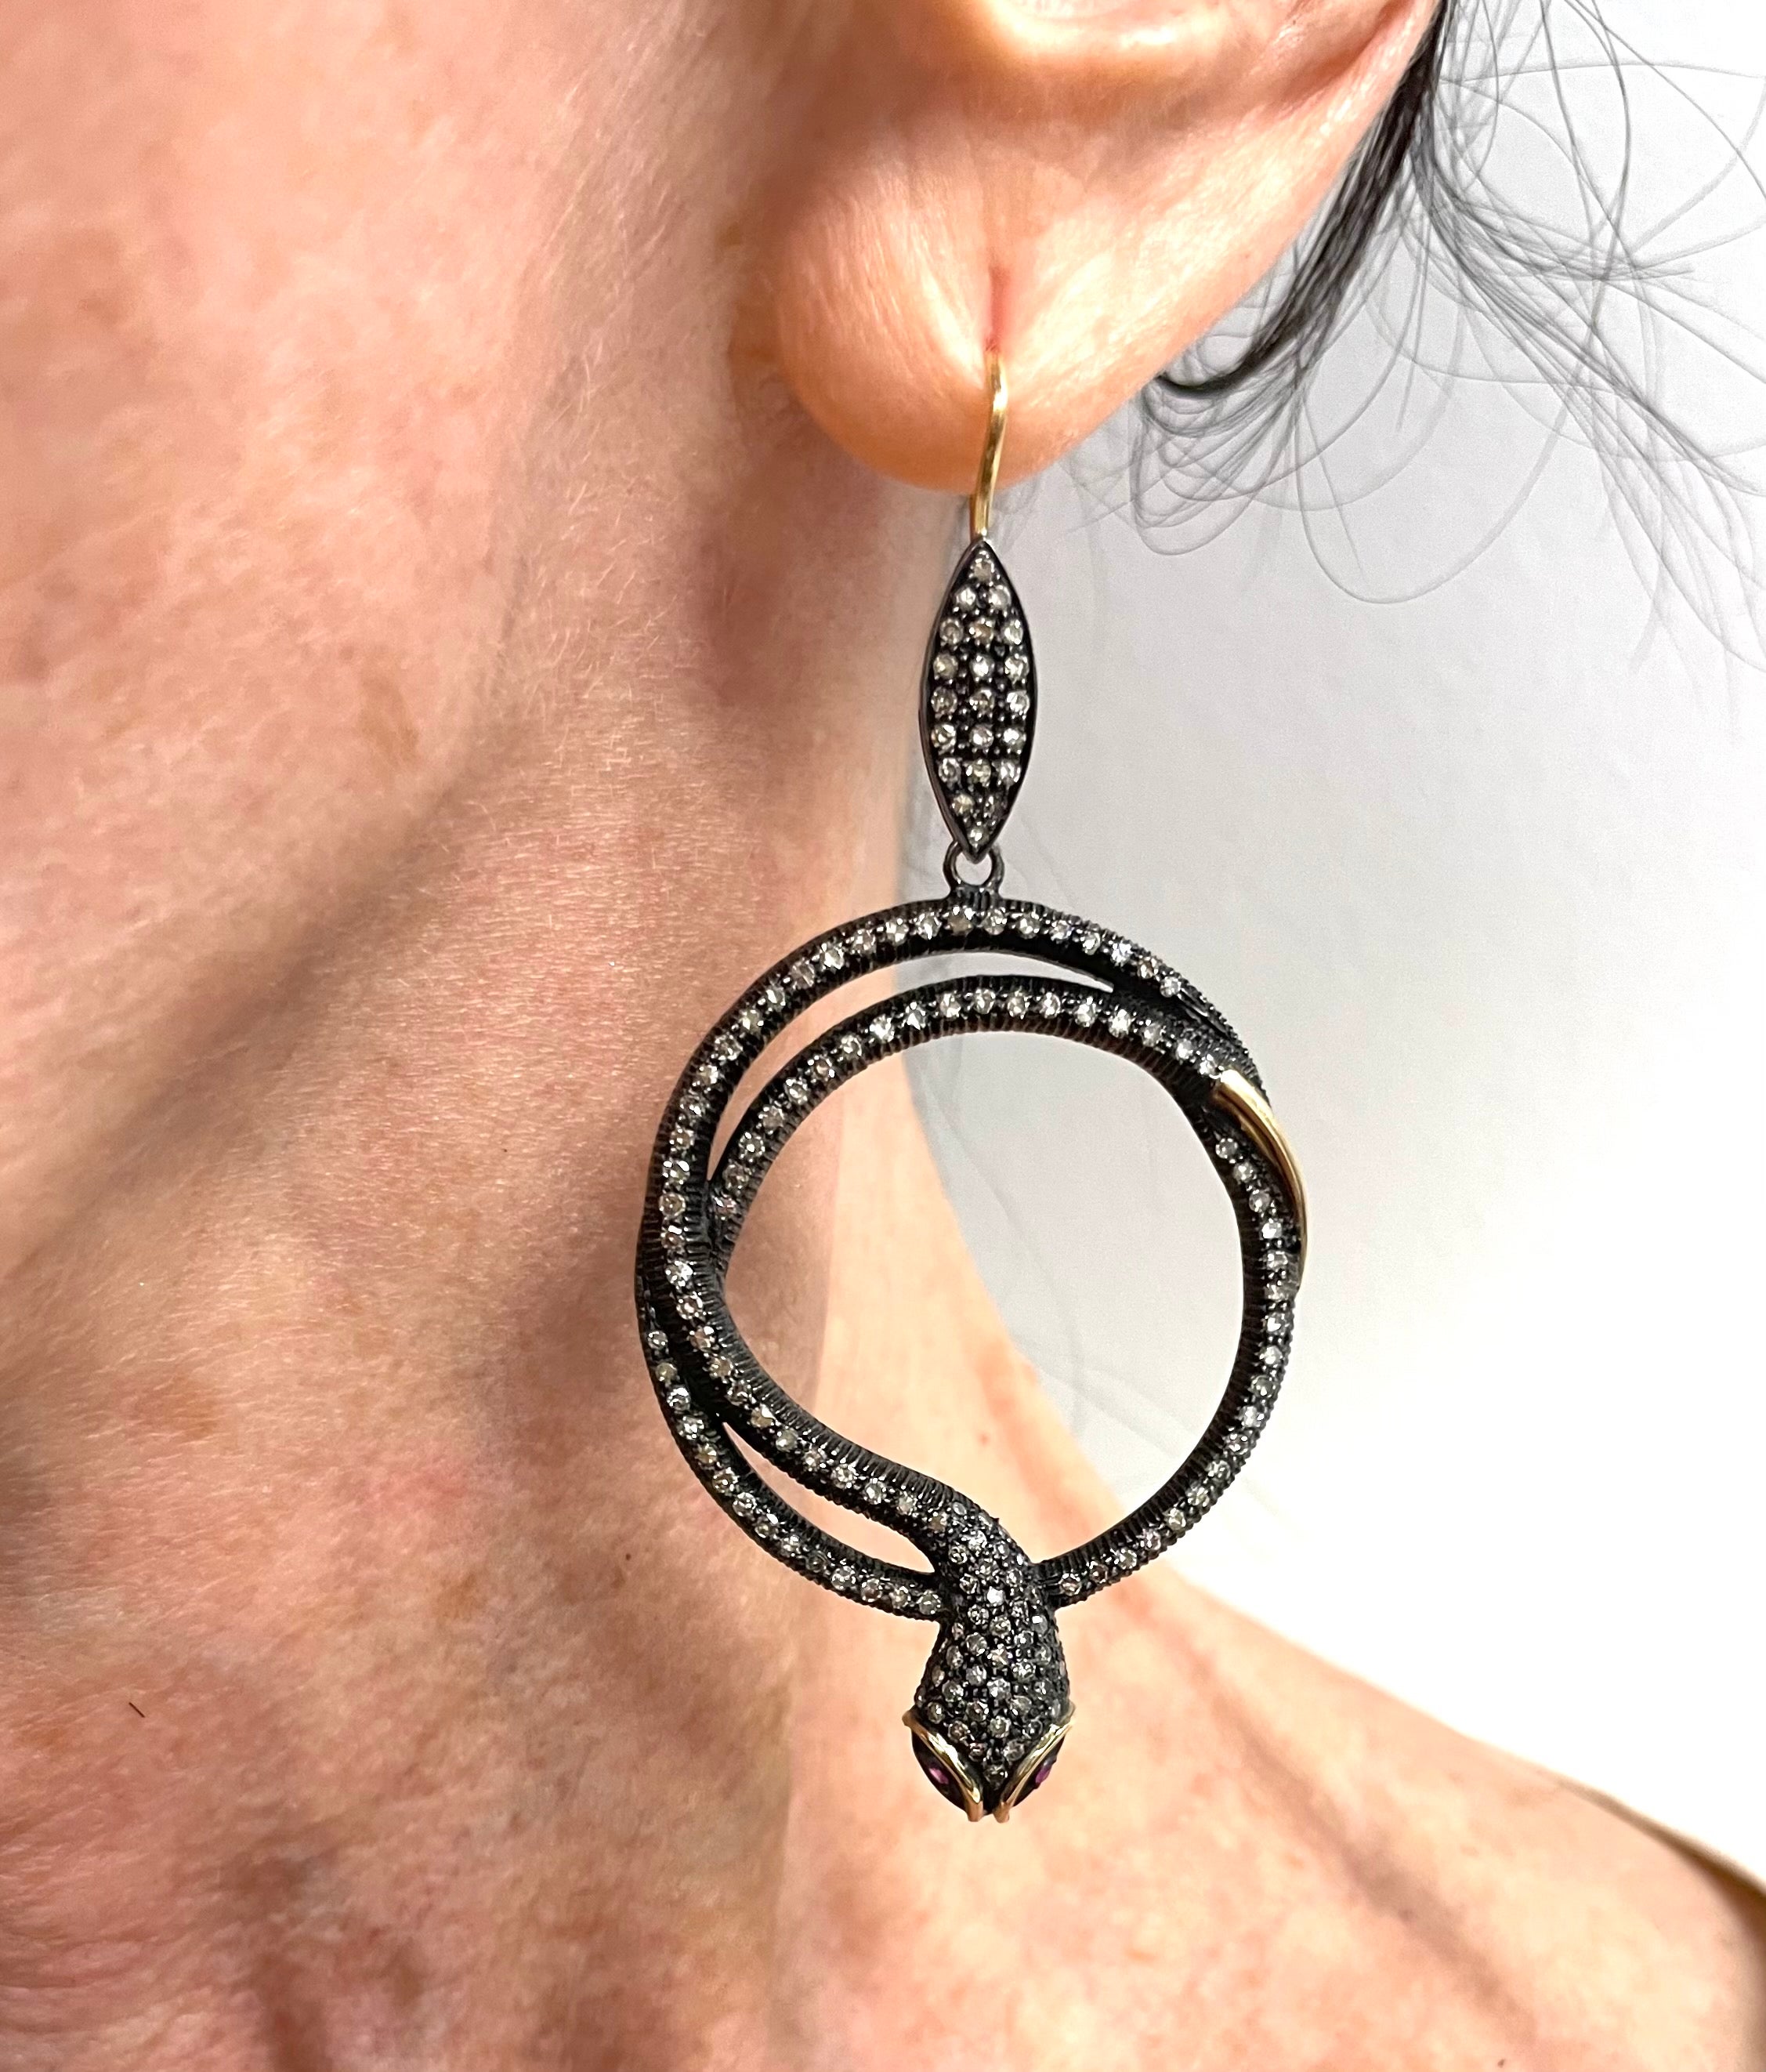 Description
Striking, exquisite and edgy, yet feminine Serpents accented with Ruby eyes and embellished with pave diamonds set in black rhodium sterling silver. Yellow gold details on the head and tail create a dramatic contrast making these